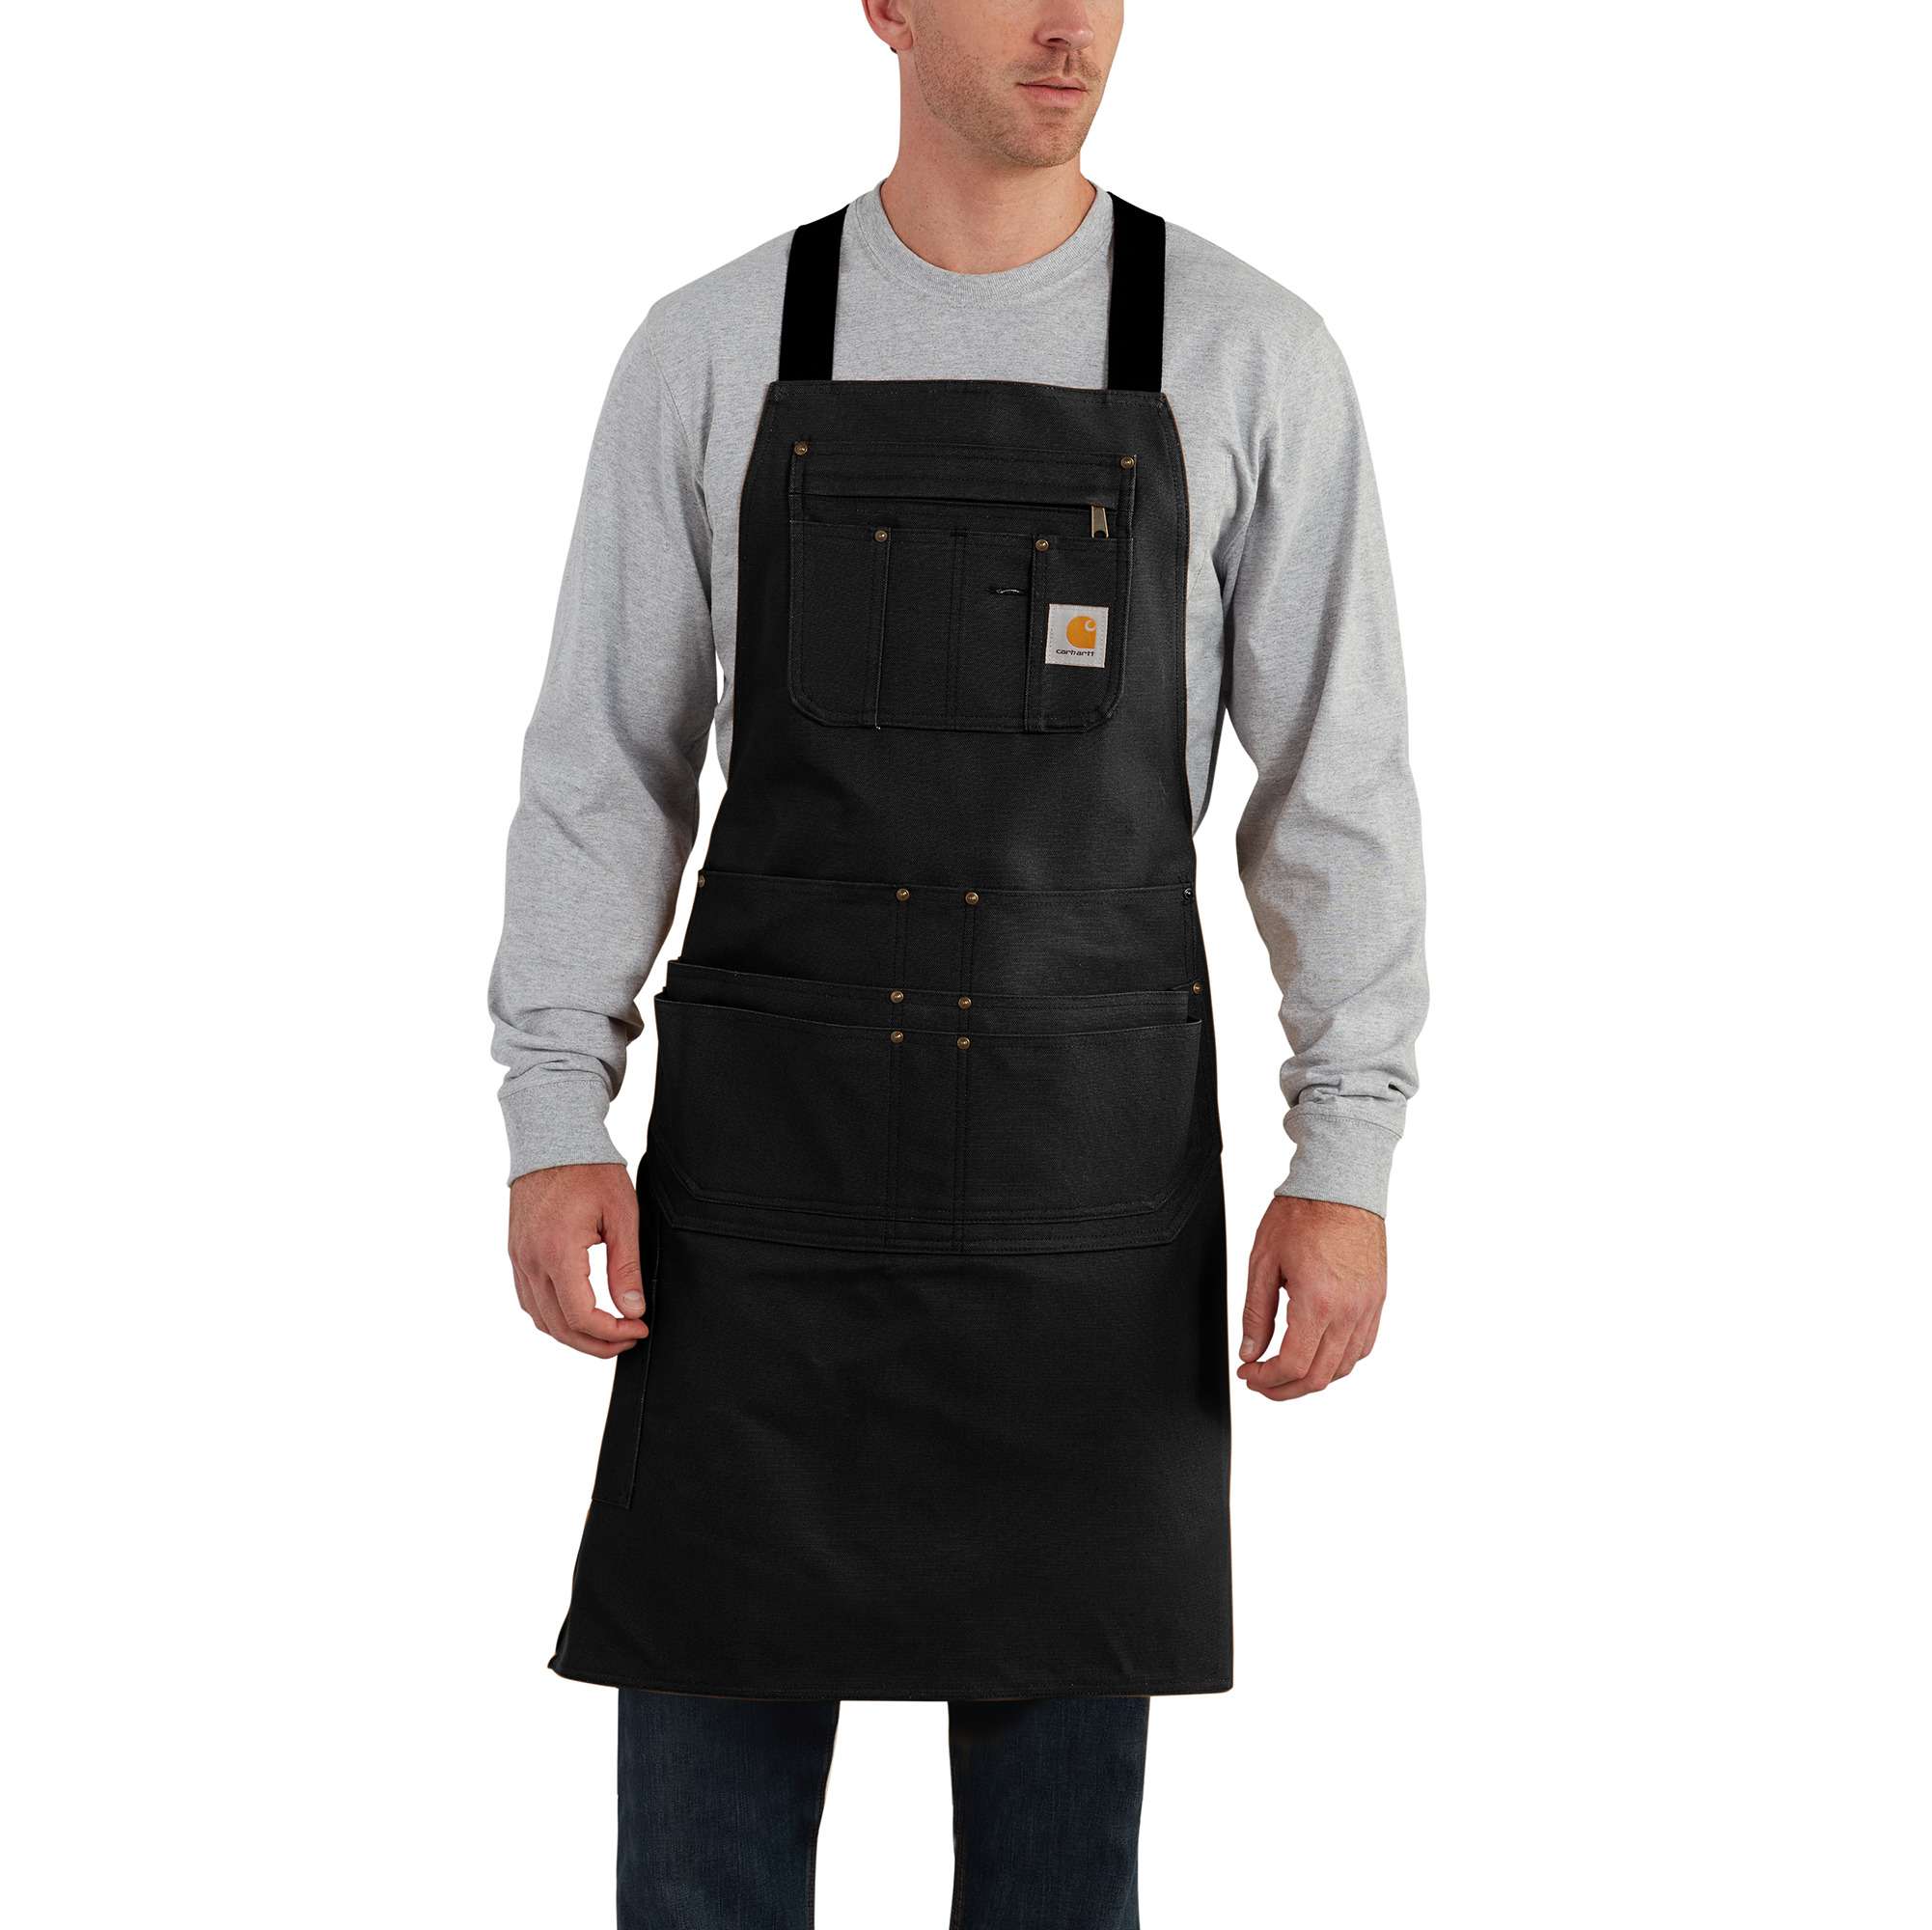 Carhartt General Construction Cotton Tool Apron in the Tool Belts